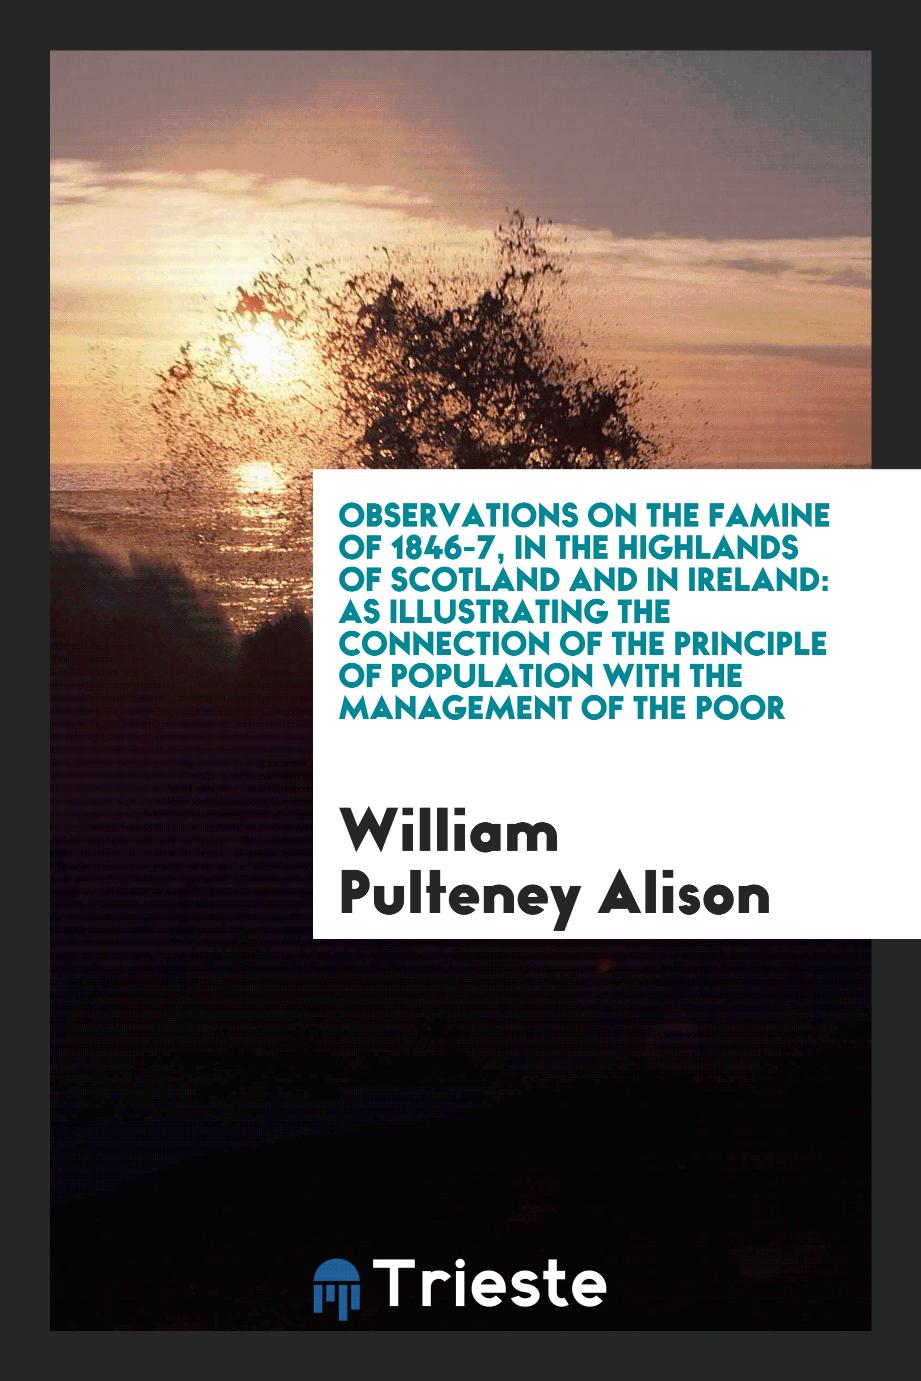 Observations on the Famine of 1846-7, in the Highlands of Scotland and in Ireland: As illustrating the connection of the principle of population with the Management of the poor